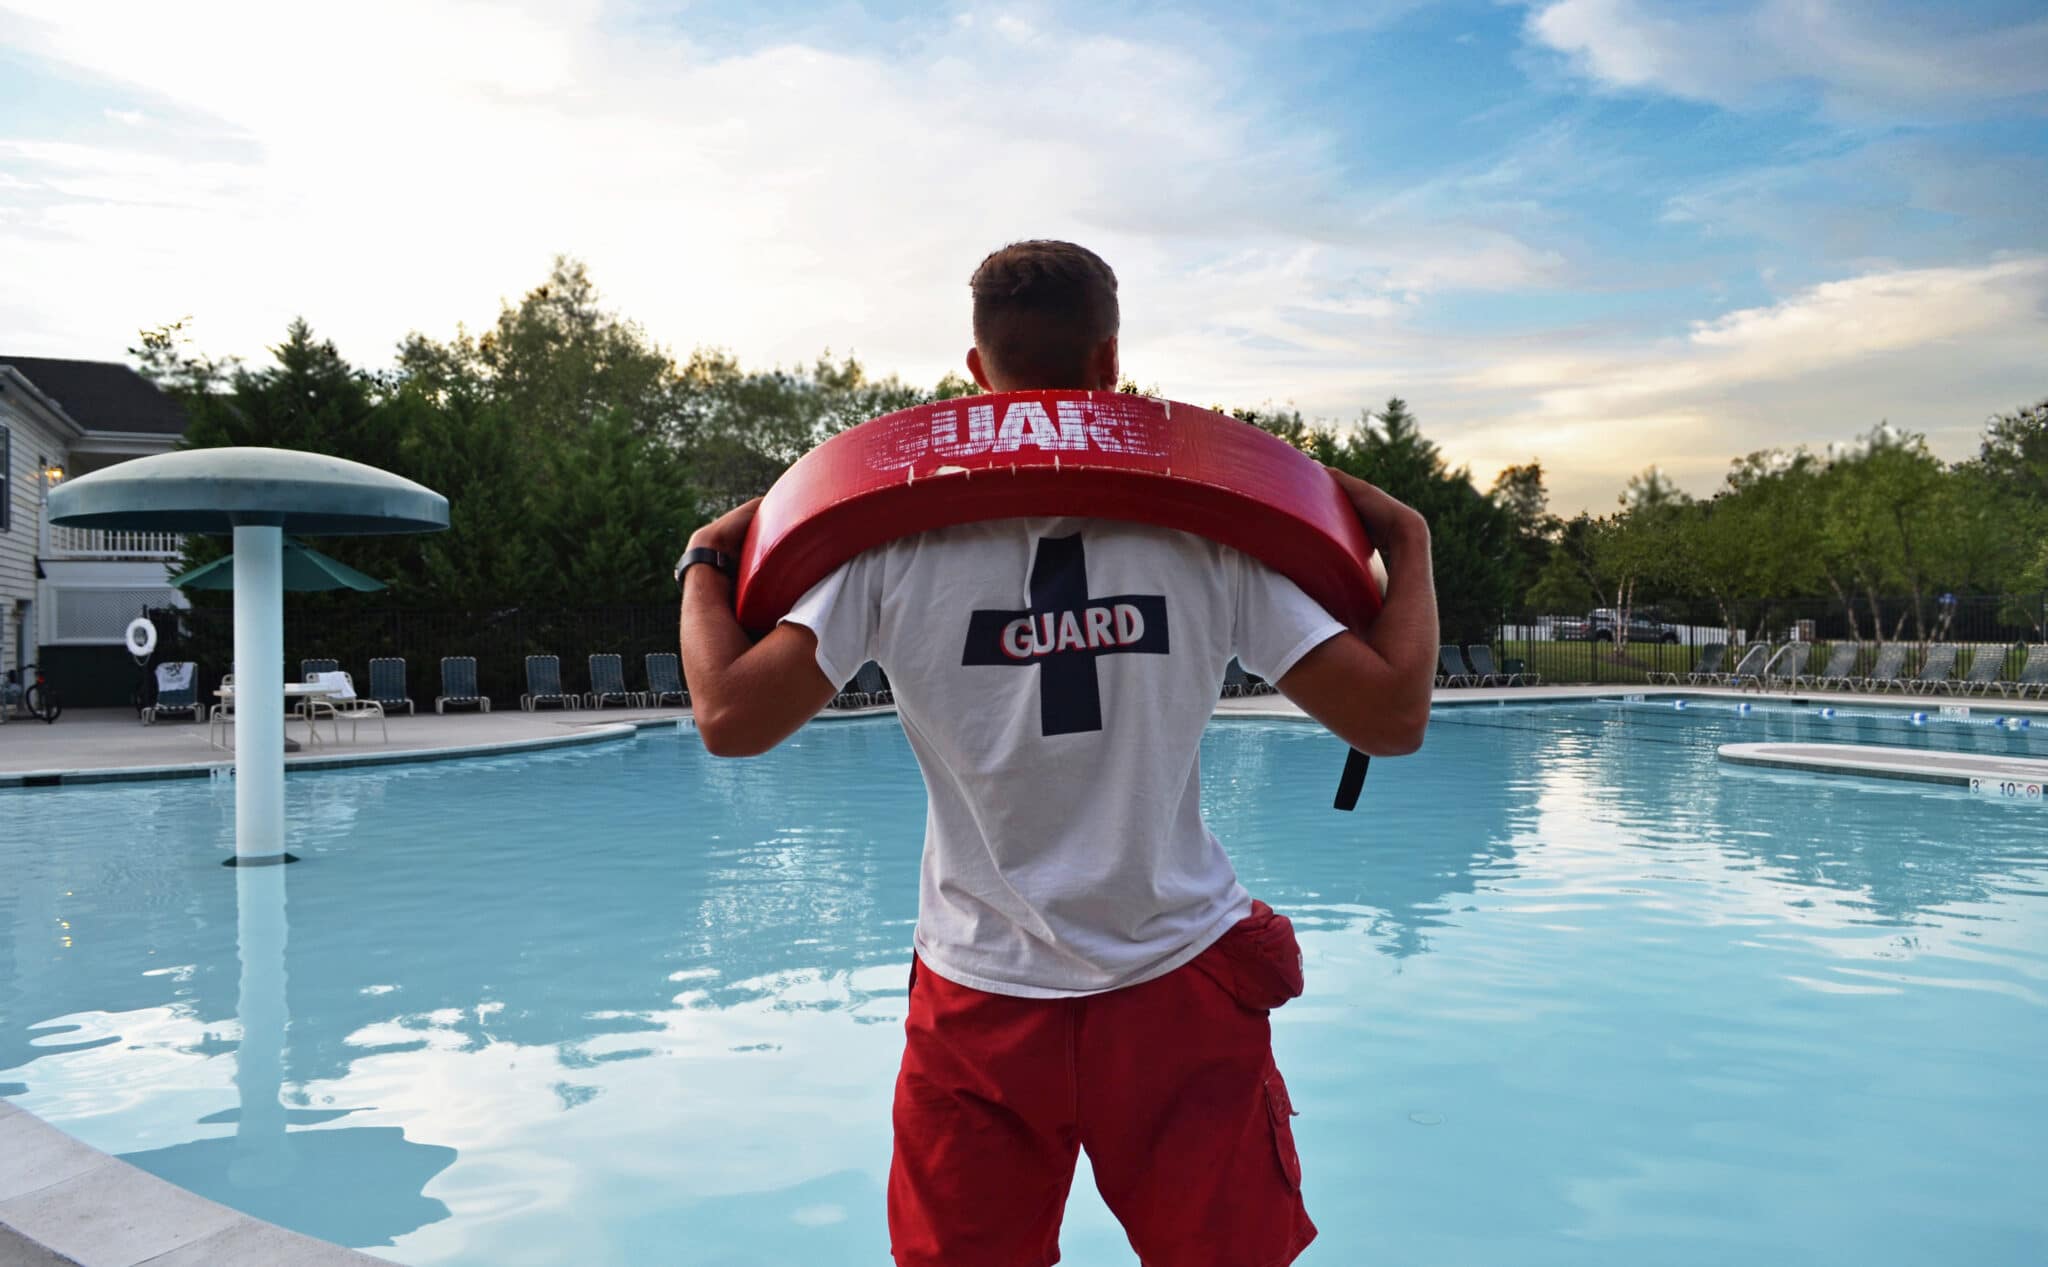 Flashback: Nothing new under the sun about this summer's lifeguard shortage